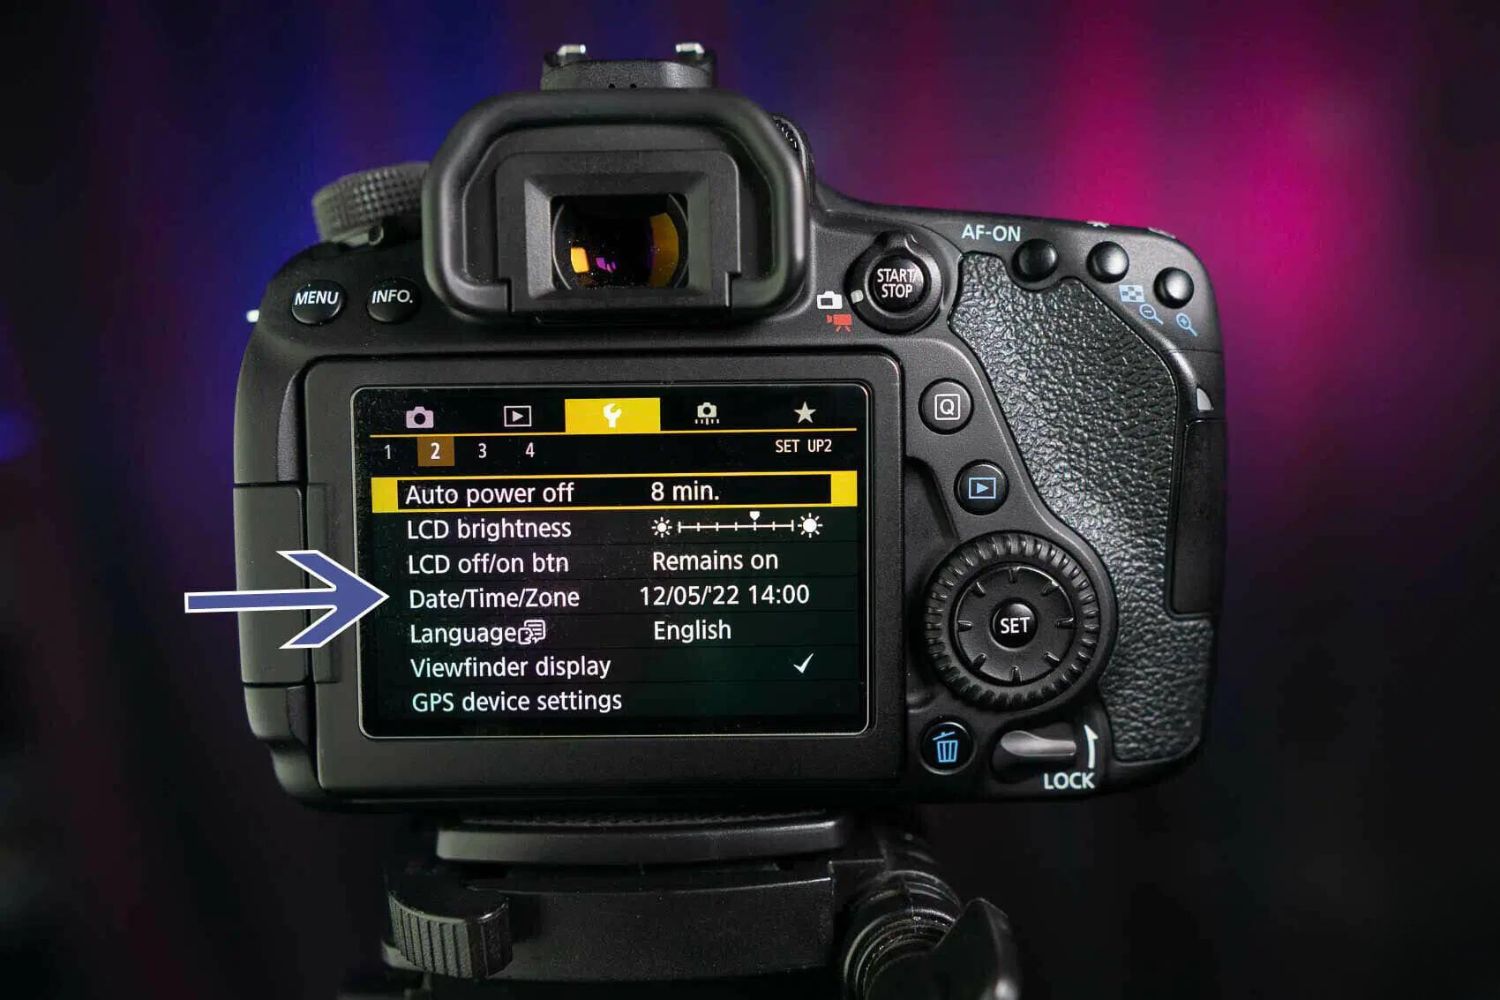 How To Get Metadata From A DSLR Camera